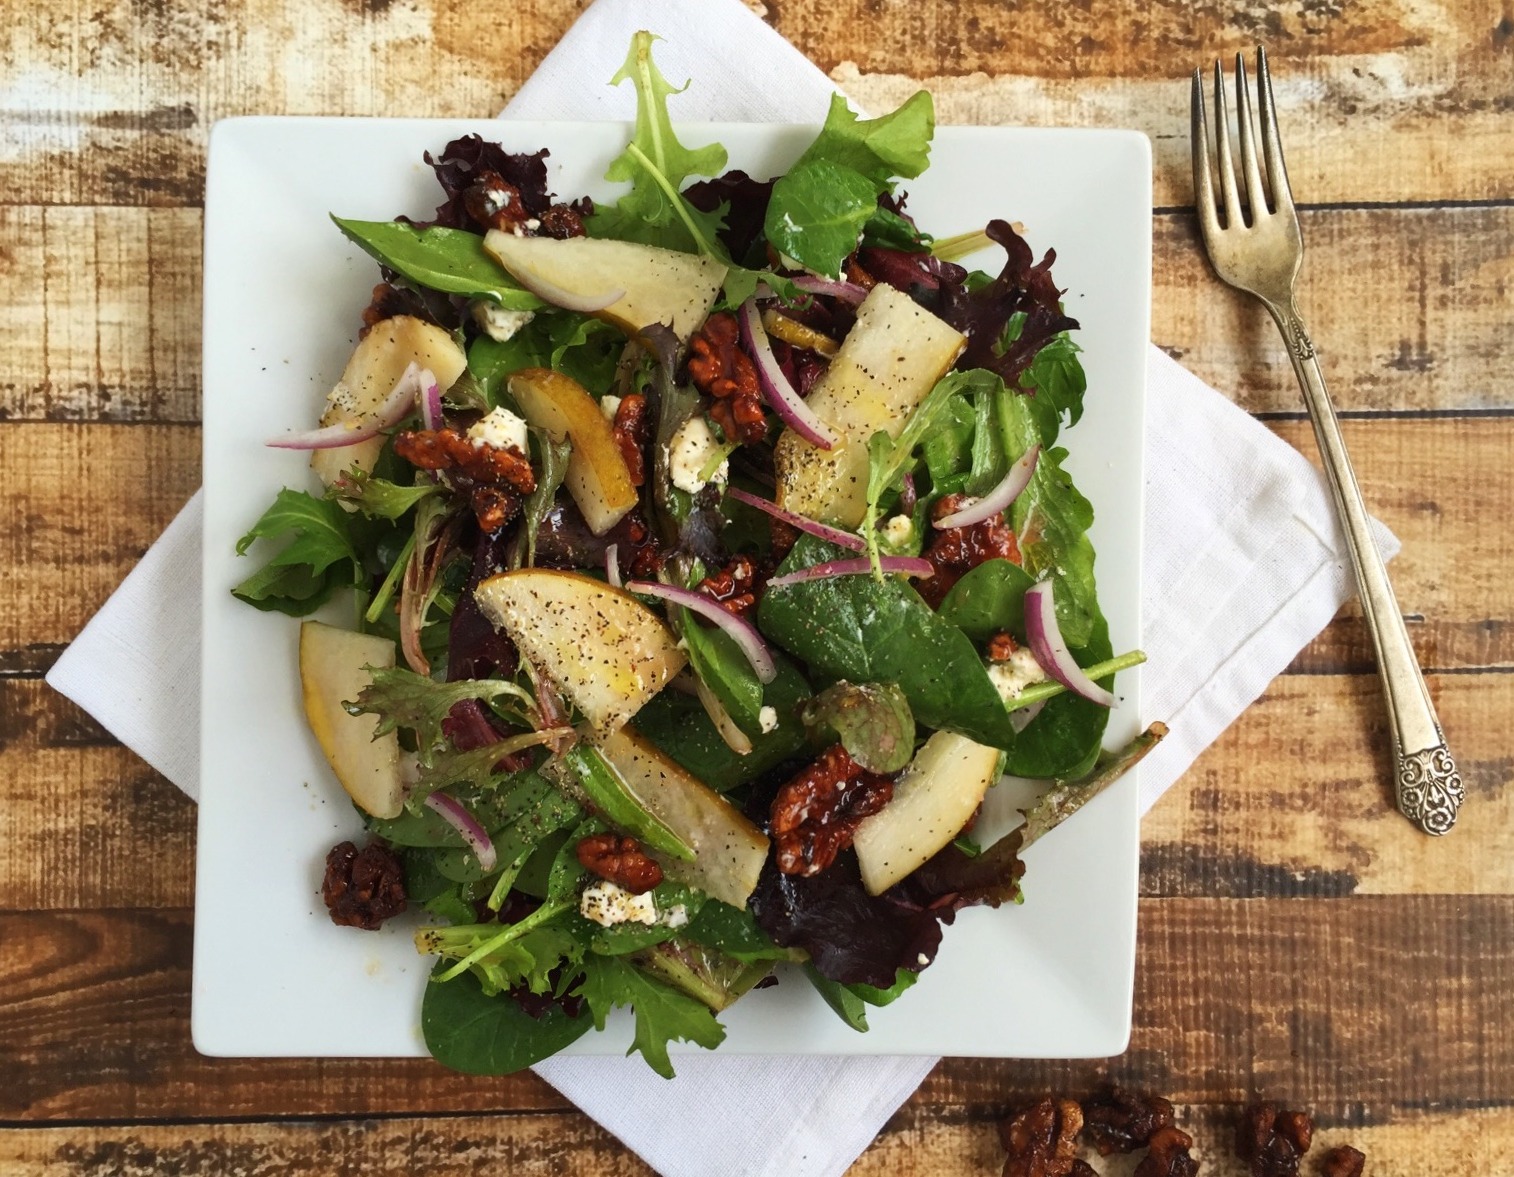 Mixed Greens with Pear, Goat Cheese, and Walnuts